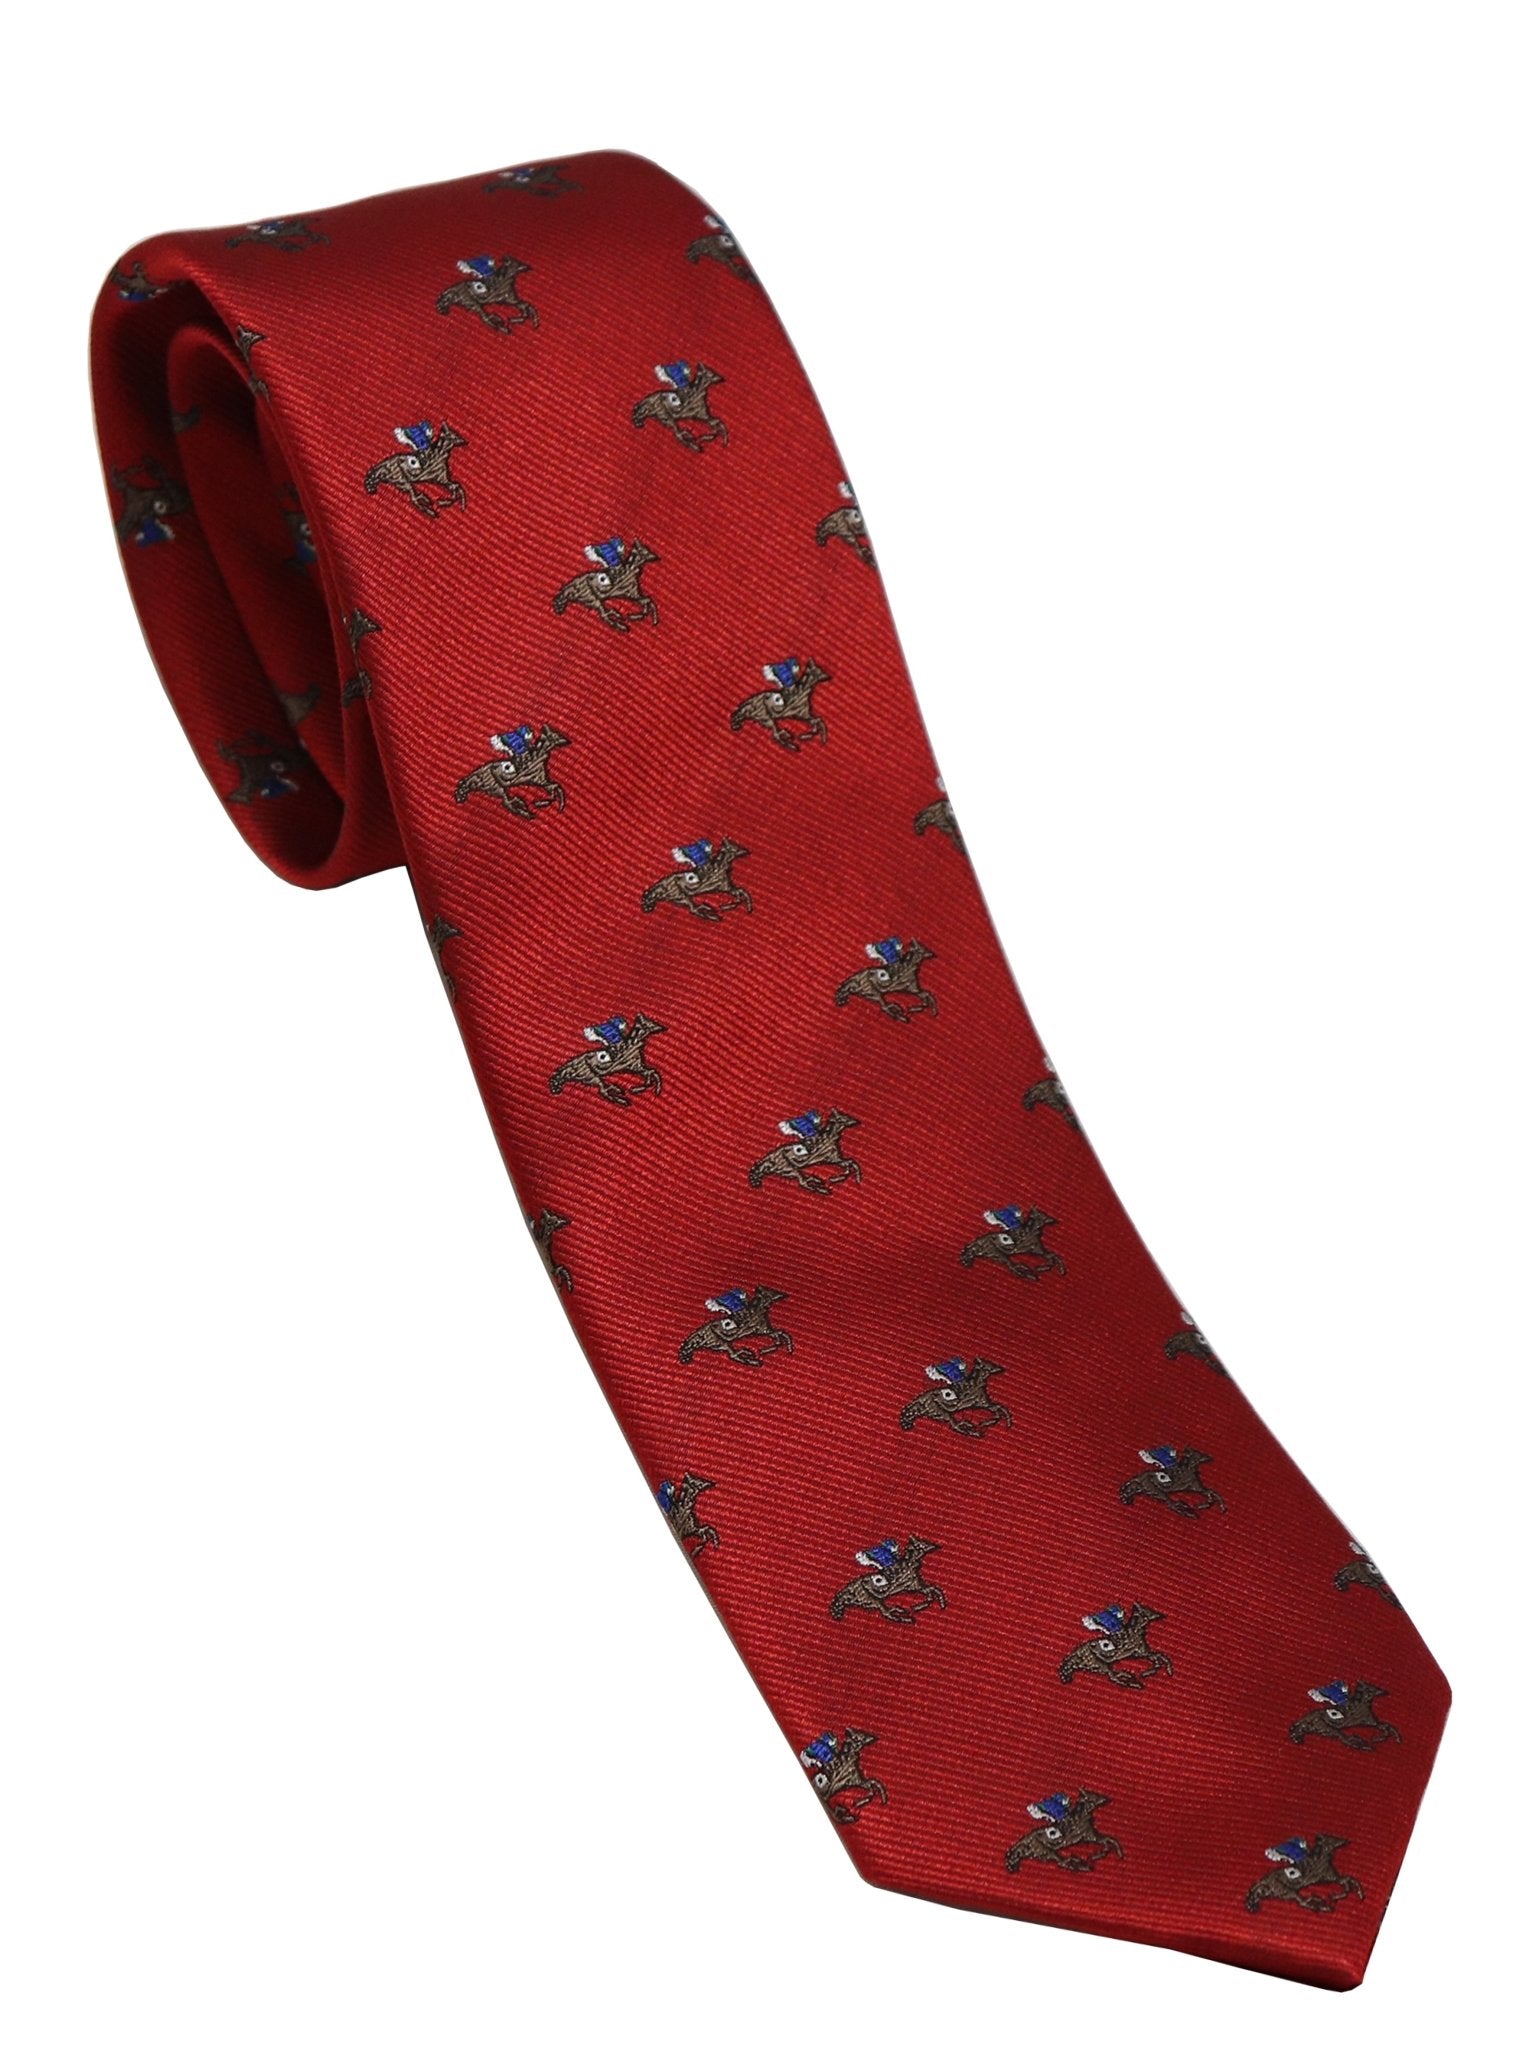 Harry Knight Esq. Horse Racing Tie - Thomson's Suits Ltd - Red - - 46946